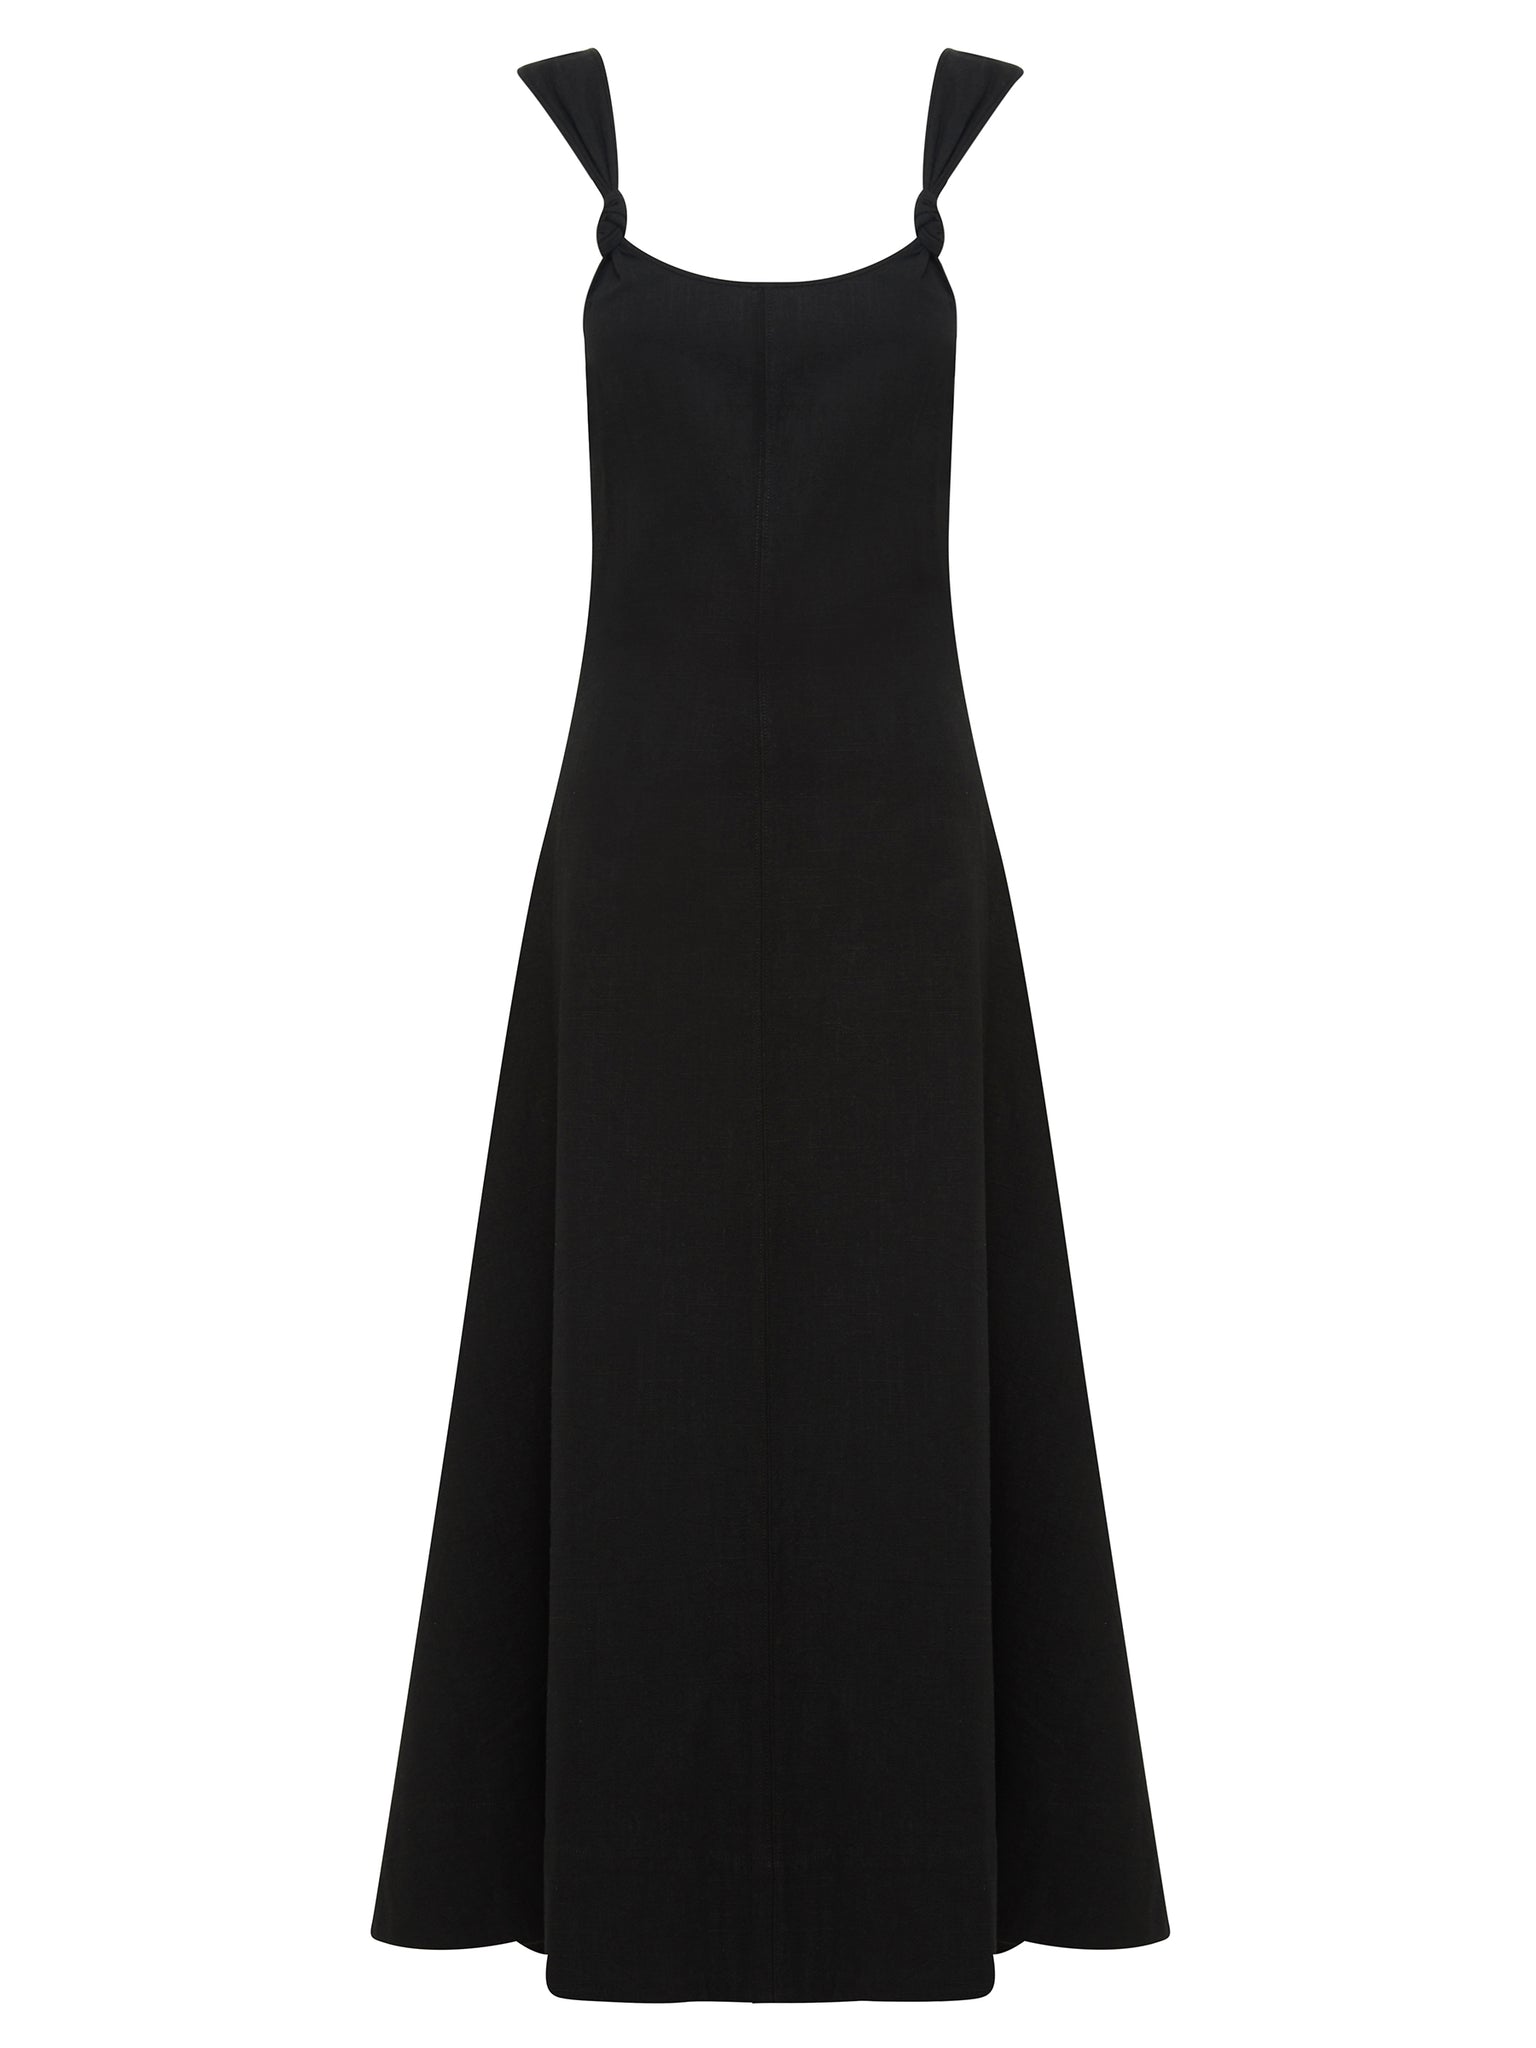 Marle | Eros Dress in Black | The UNDONE by Marle